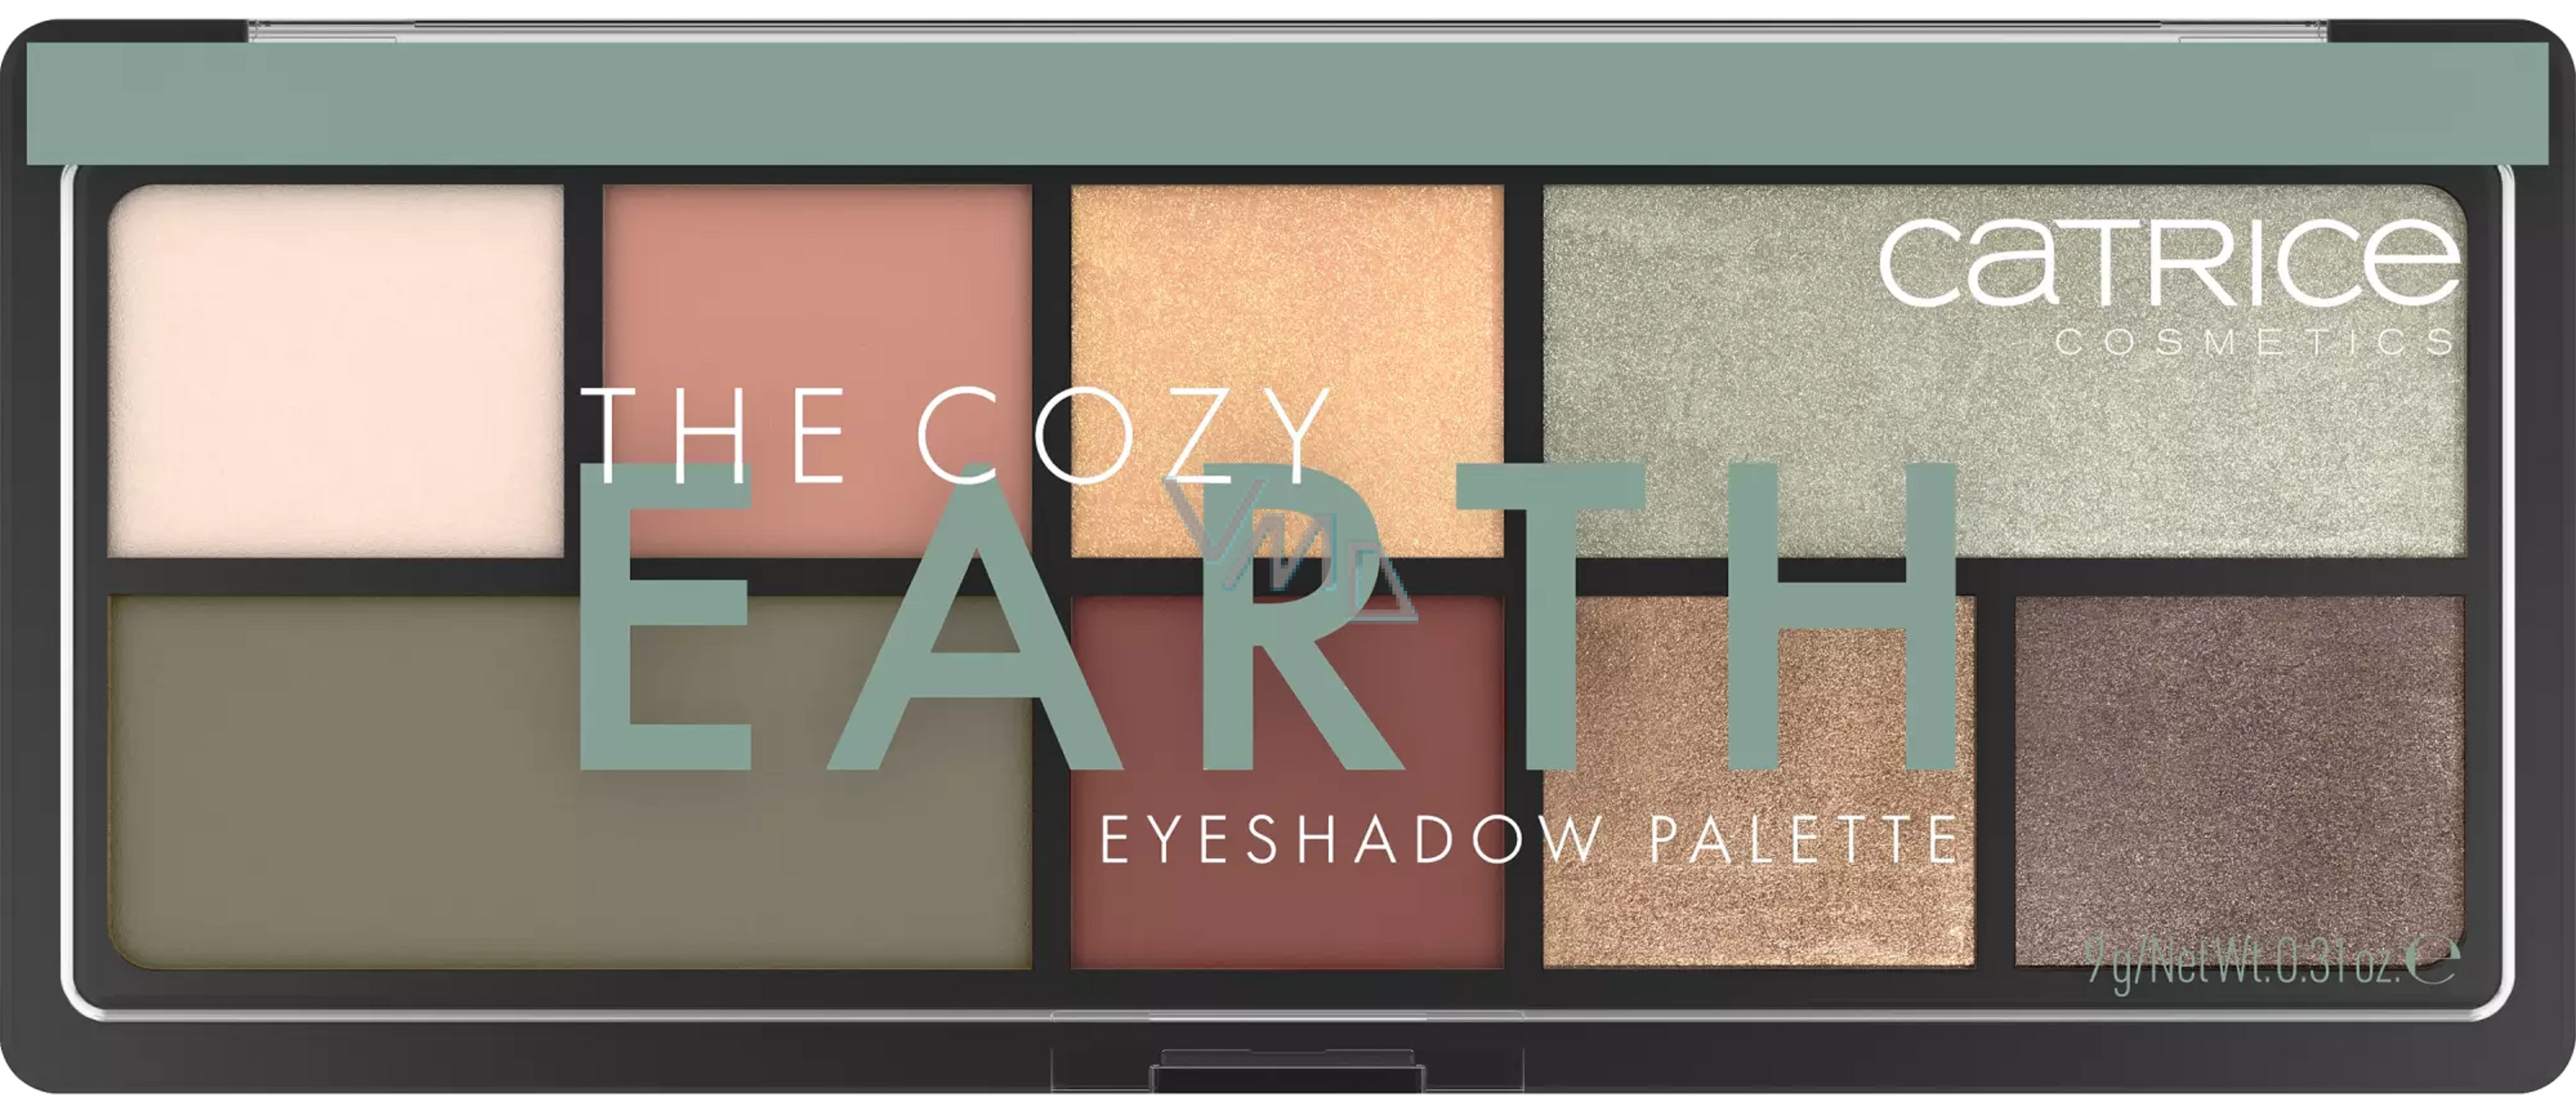 Catrice The Cozy Earth Eyeshadow Palette 9 g - VMD parfumerie - drogerie